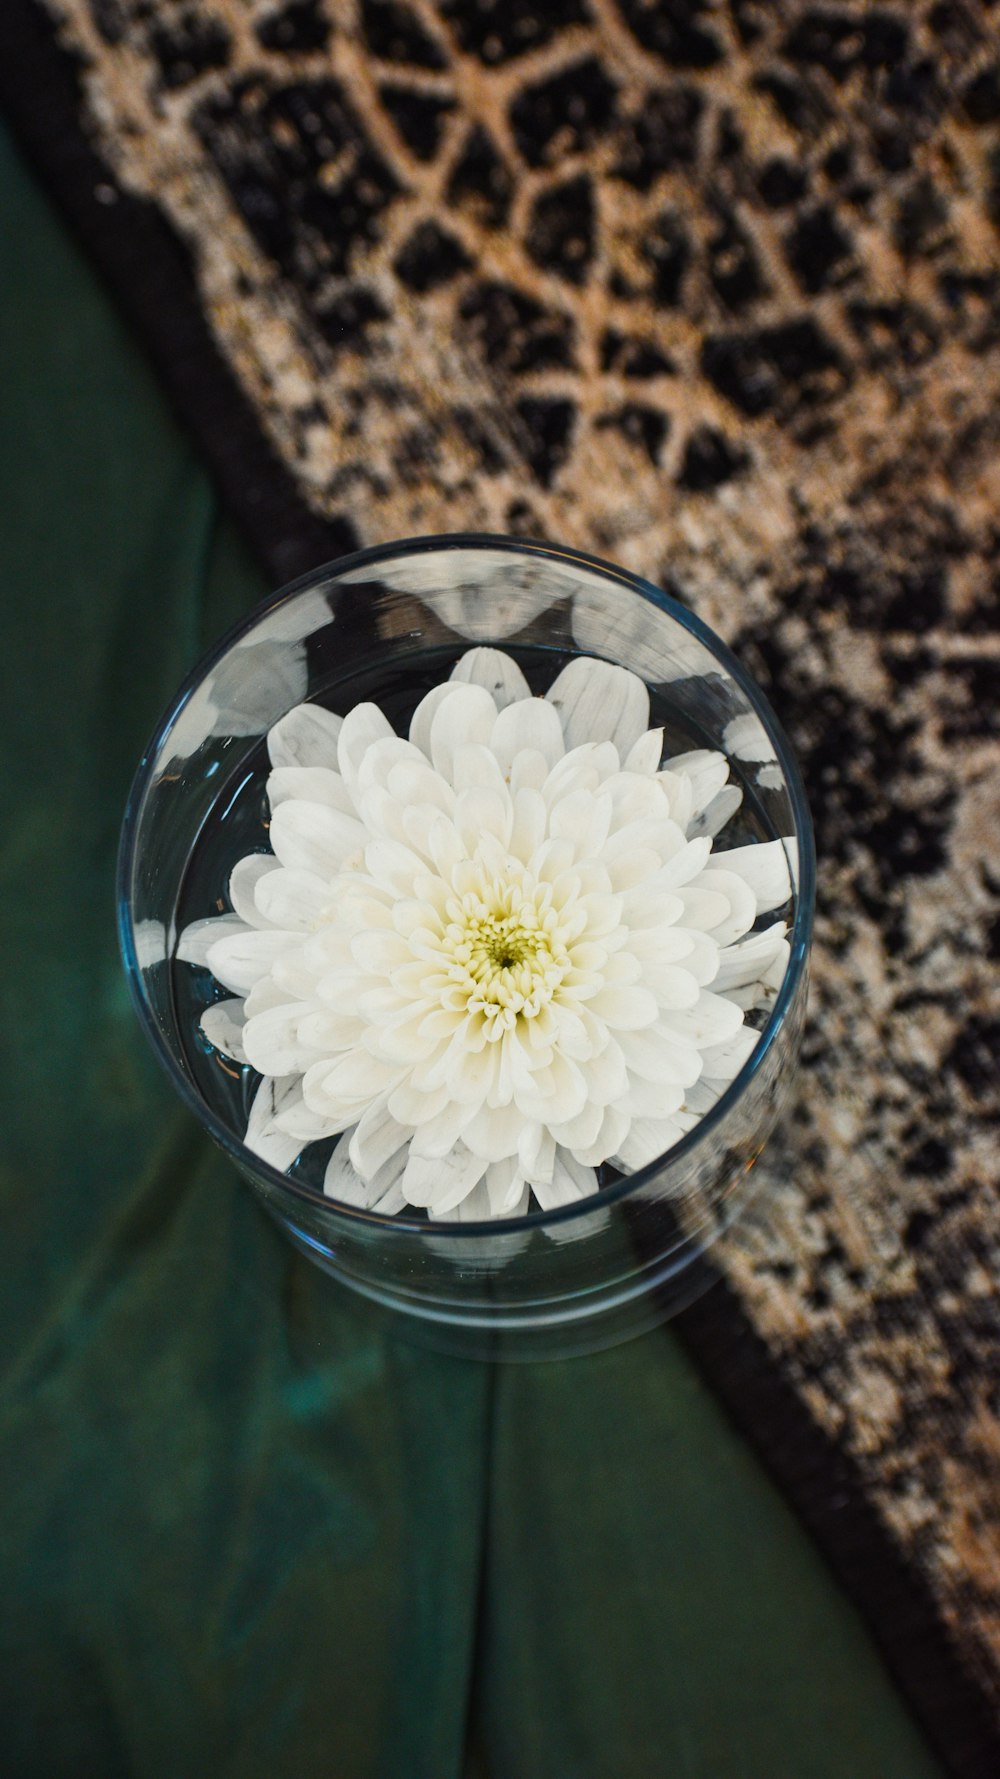 a white flower in a clear glass vase